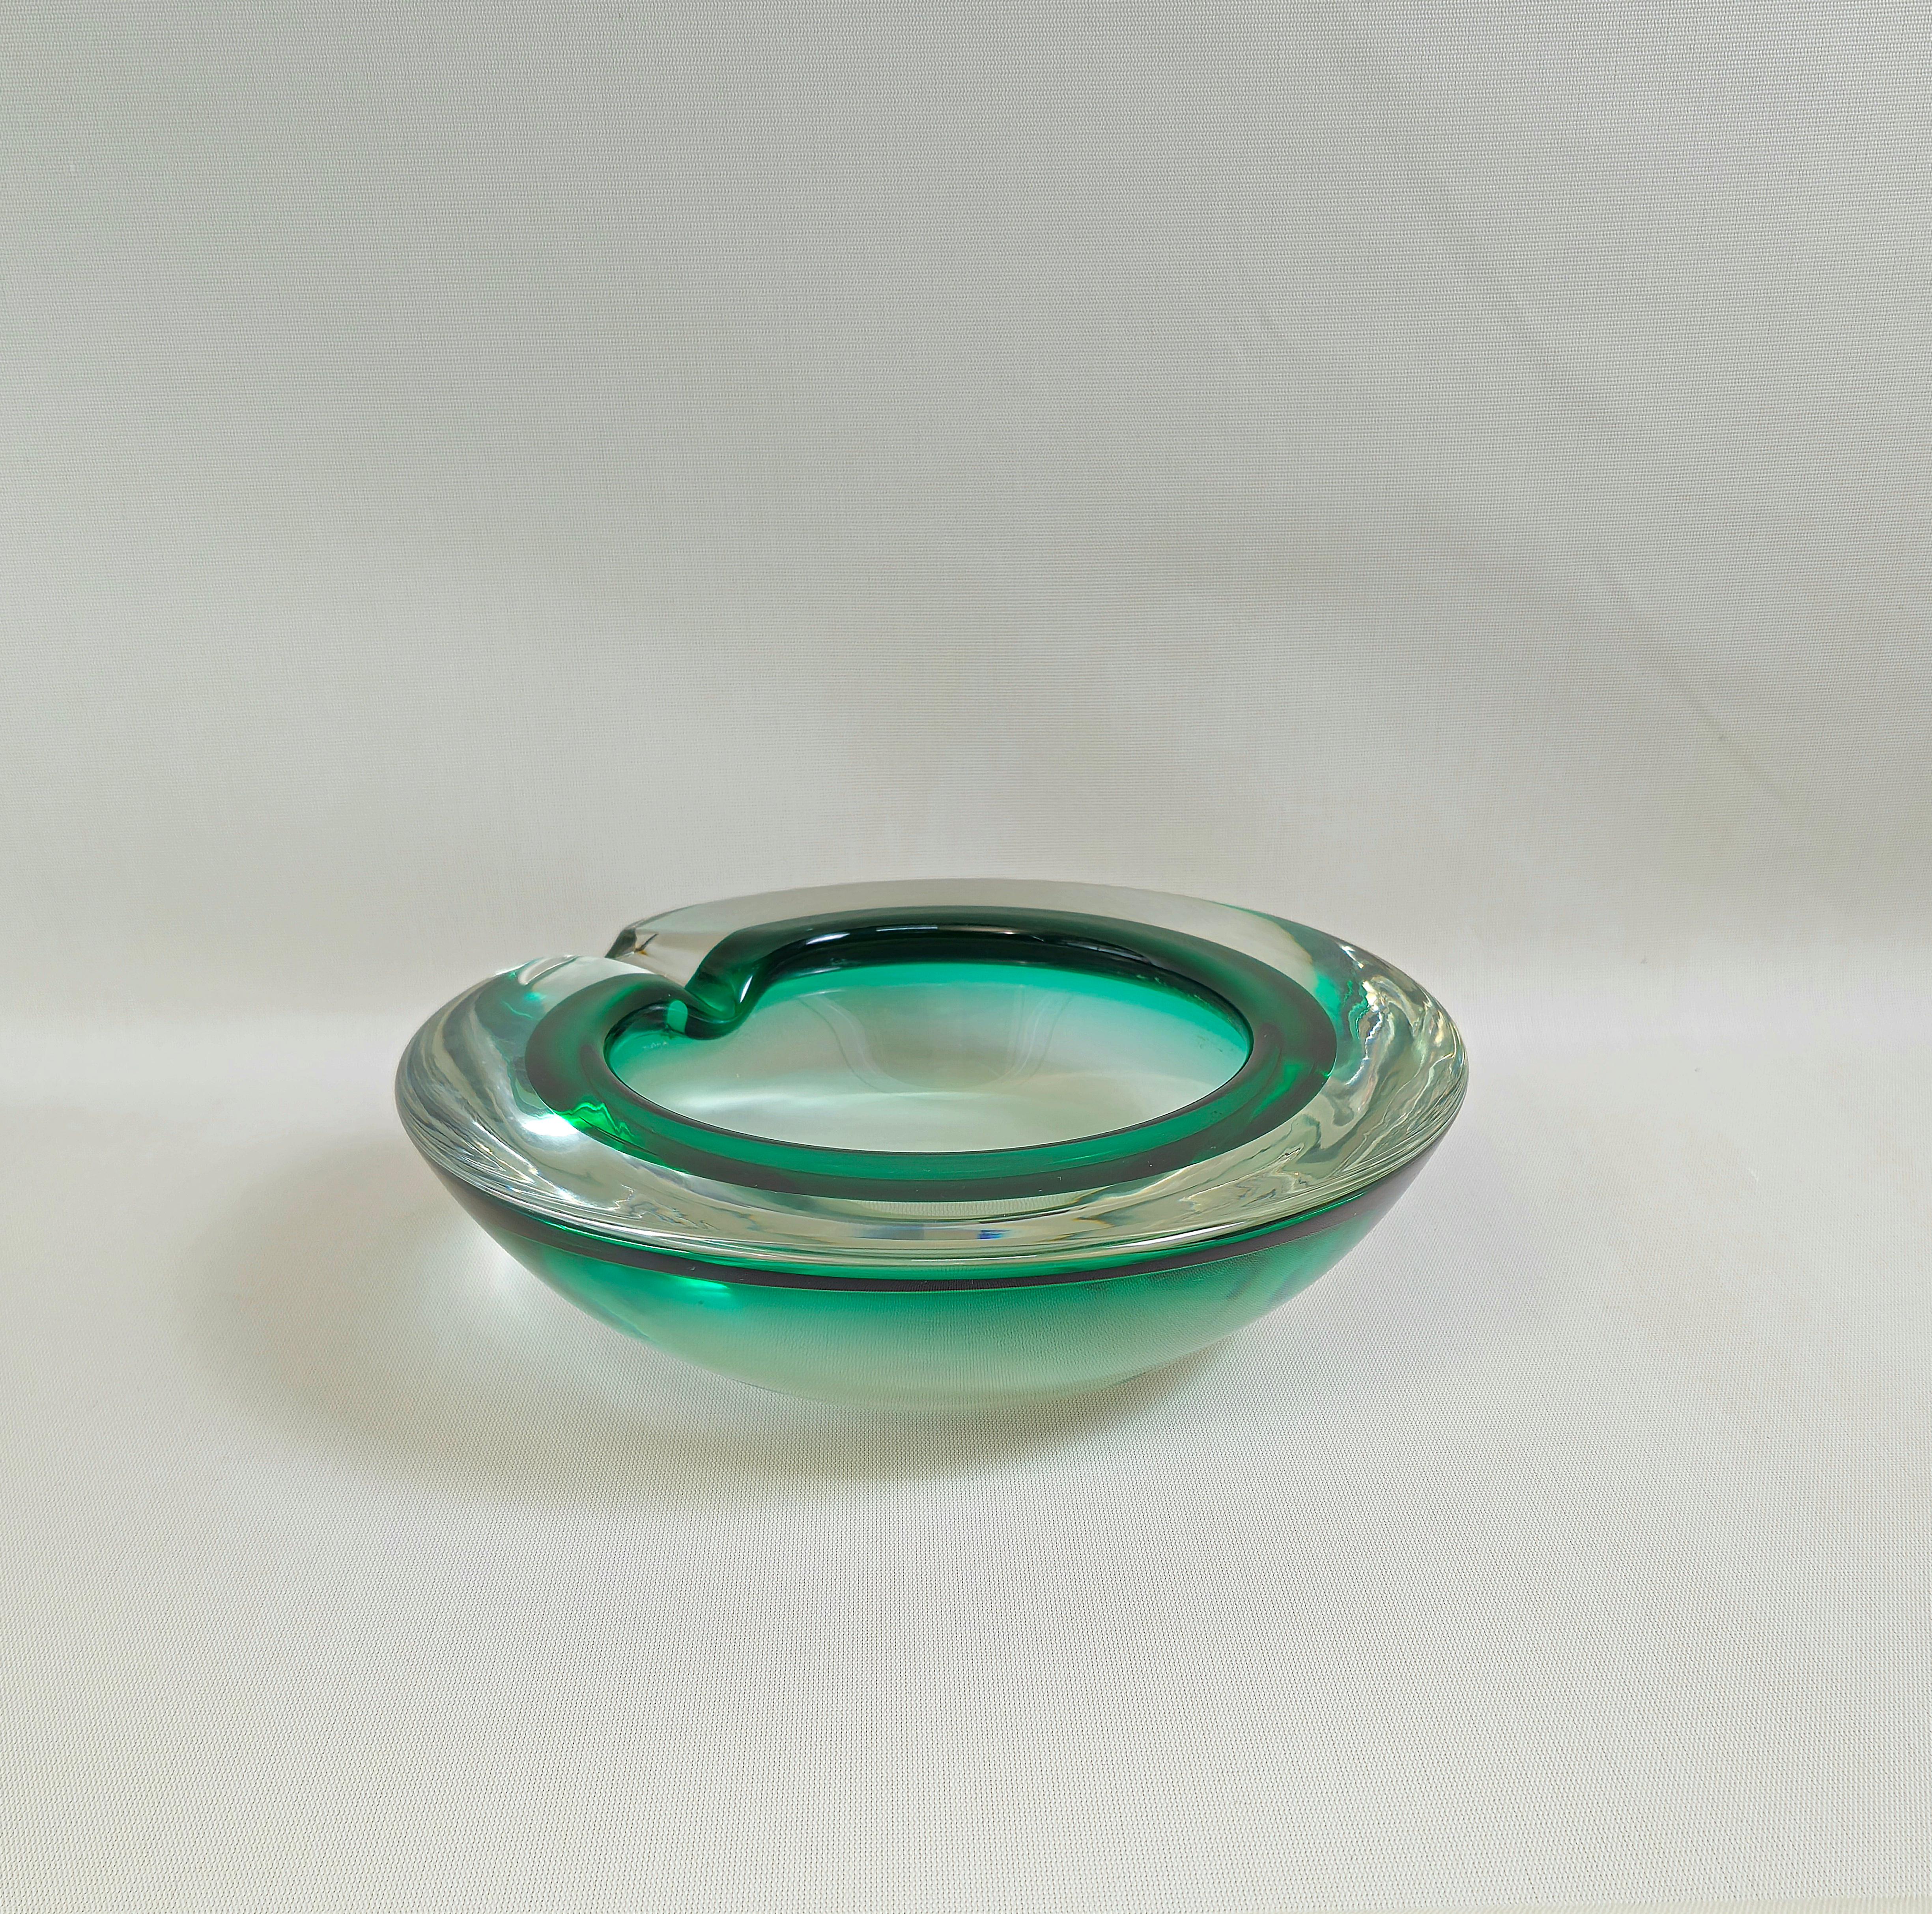 Ashtray Murano Glass Green Transparent  Midcentury Modern Italian Design 1960s In Good Condition For Sale In Palermo, IT